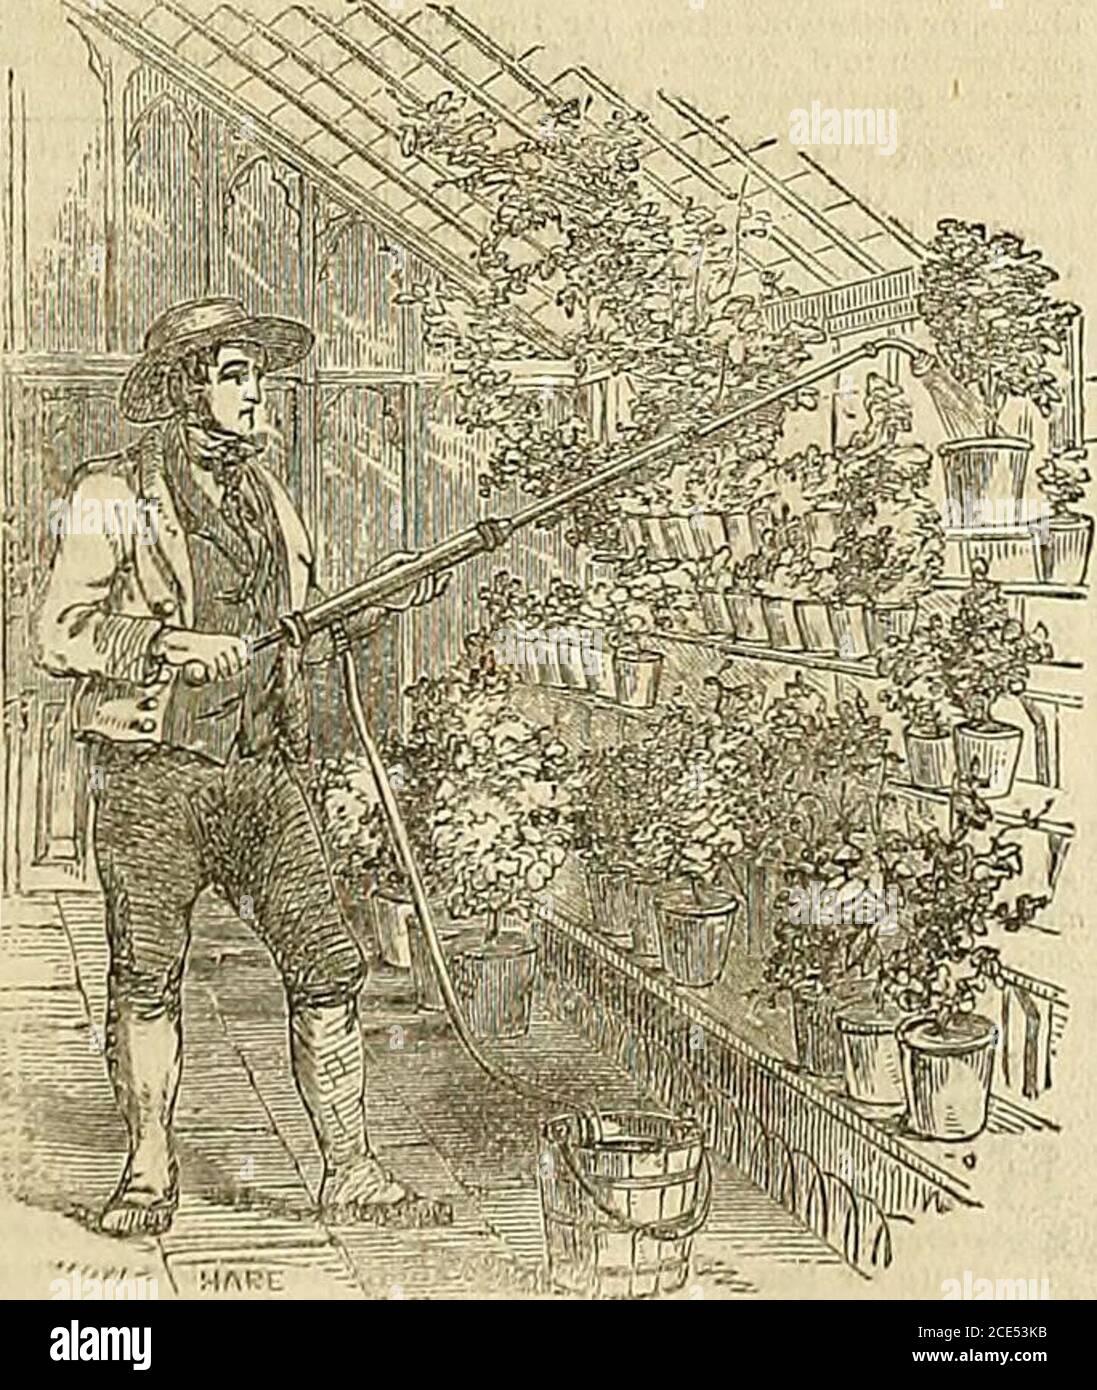 . The Gardeners' Chronicle and Agricultural Gazette . oint, andregistered Spreader, which answers the purpose of the separaterose fan and jet. No. 10 holds 6 gallons, throws 25 feet high ... £2 15No. 13 „ 12 „ „ 30 „ ... 3 6 No. 11 „ 16 „ „ 40 „ ... 4 0 No. 12 „ 24 „ „ 45 „ ... 5 0 No. 14 „ 30 „ „ 45 „ ... 5 18 A lari^e assortment of every description of Garden SyringesPail Enginpp, Conservatory Pumps, &c., kept in Stock. No. 1, Plain Syringe, with rose and jet, diameter of barrel,1^ inch, lis 3d.; No. 2, do., diameter of barrel, 1| inch, 12*.;No. 3, do, diameter of barrel, 1| inch, 10s.6d. Rh Stock Photo